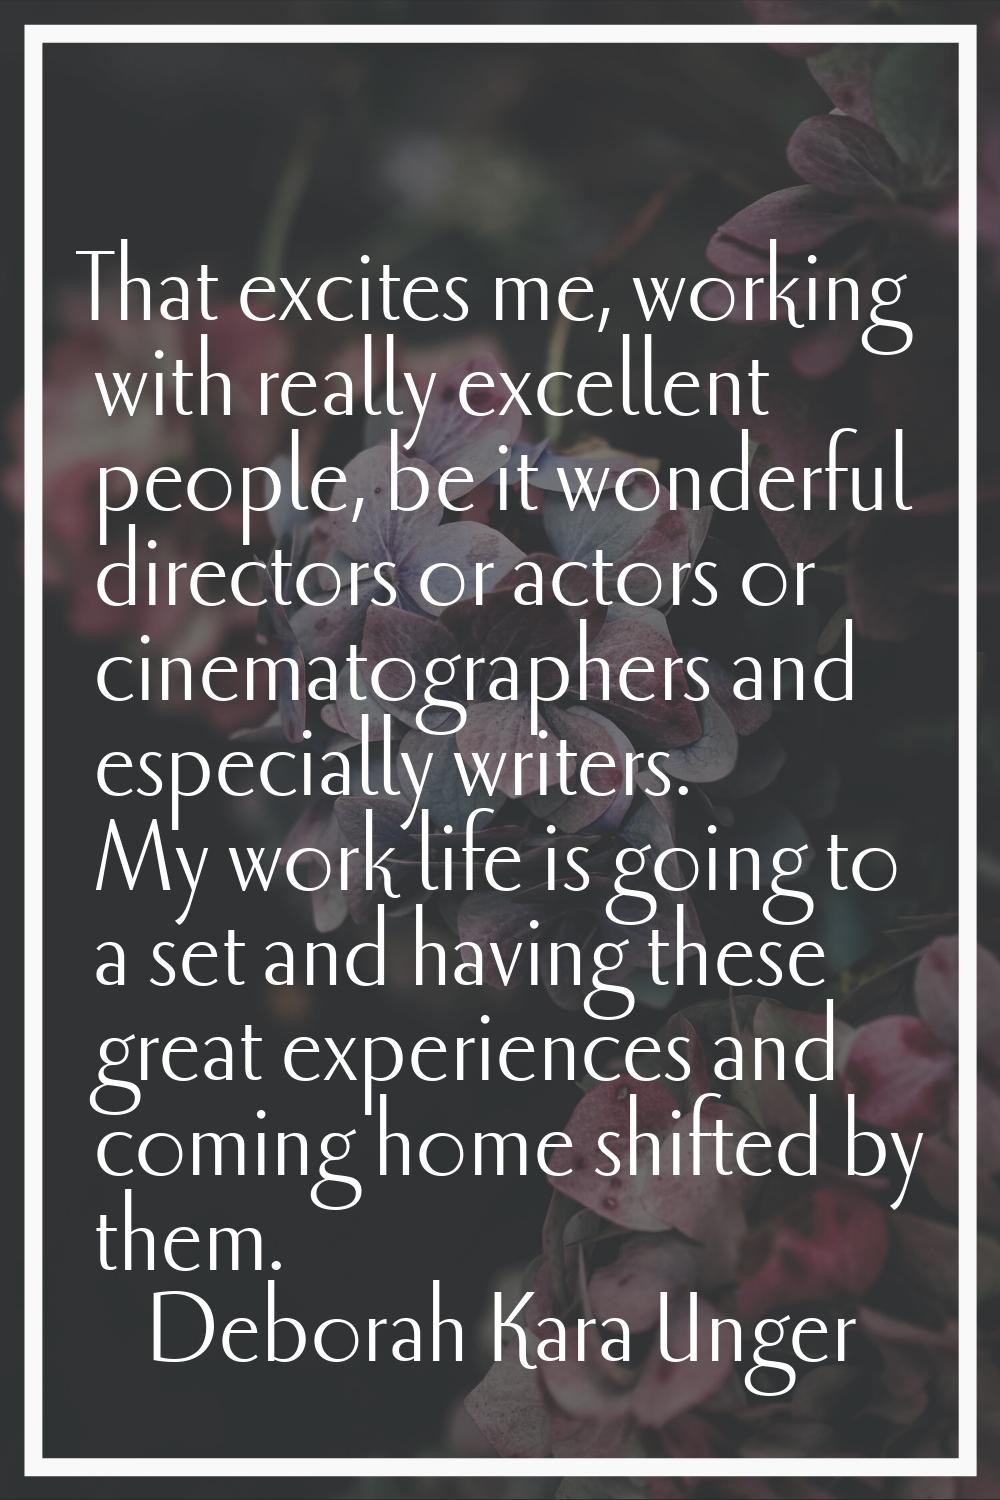 That excites me, working with really excellent people, be it wonderful directors or actors or cinem